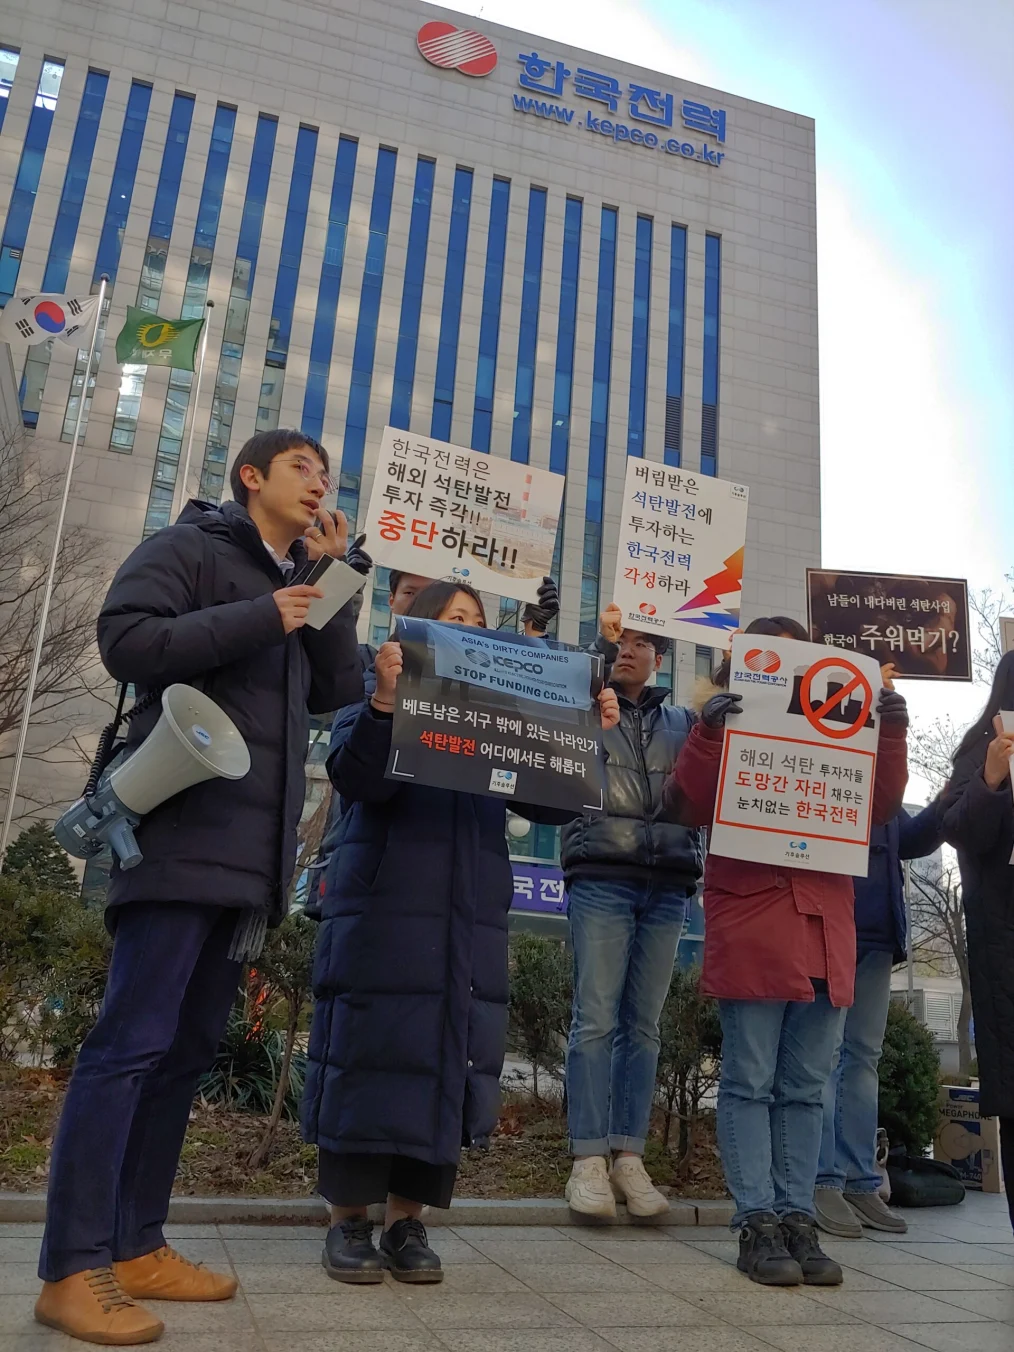 Sejong Youn holds a megaphone as he stands outside next to five other demonstrators at a protest on overseas coal investment. Demonstrators are wearing winter coats and holding signs.